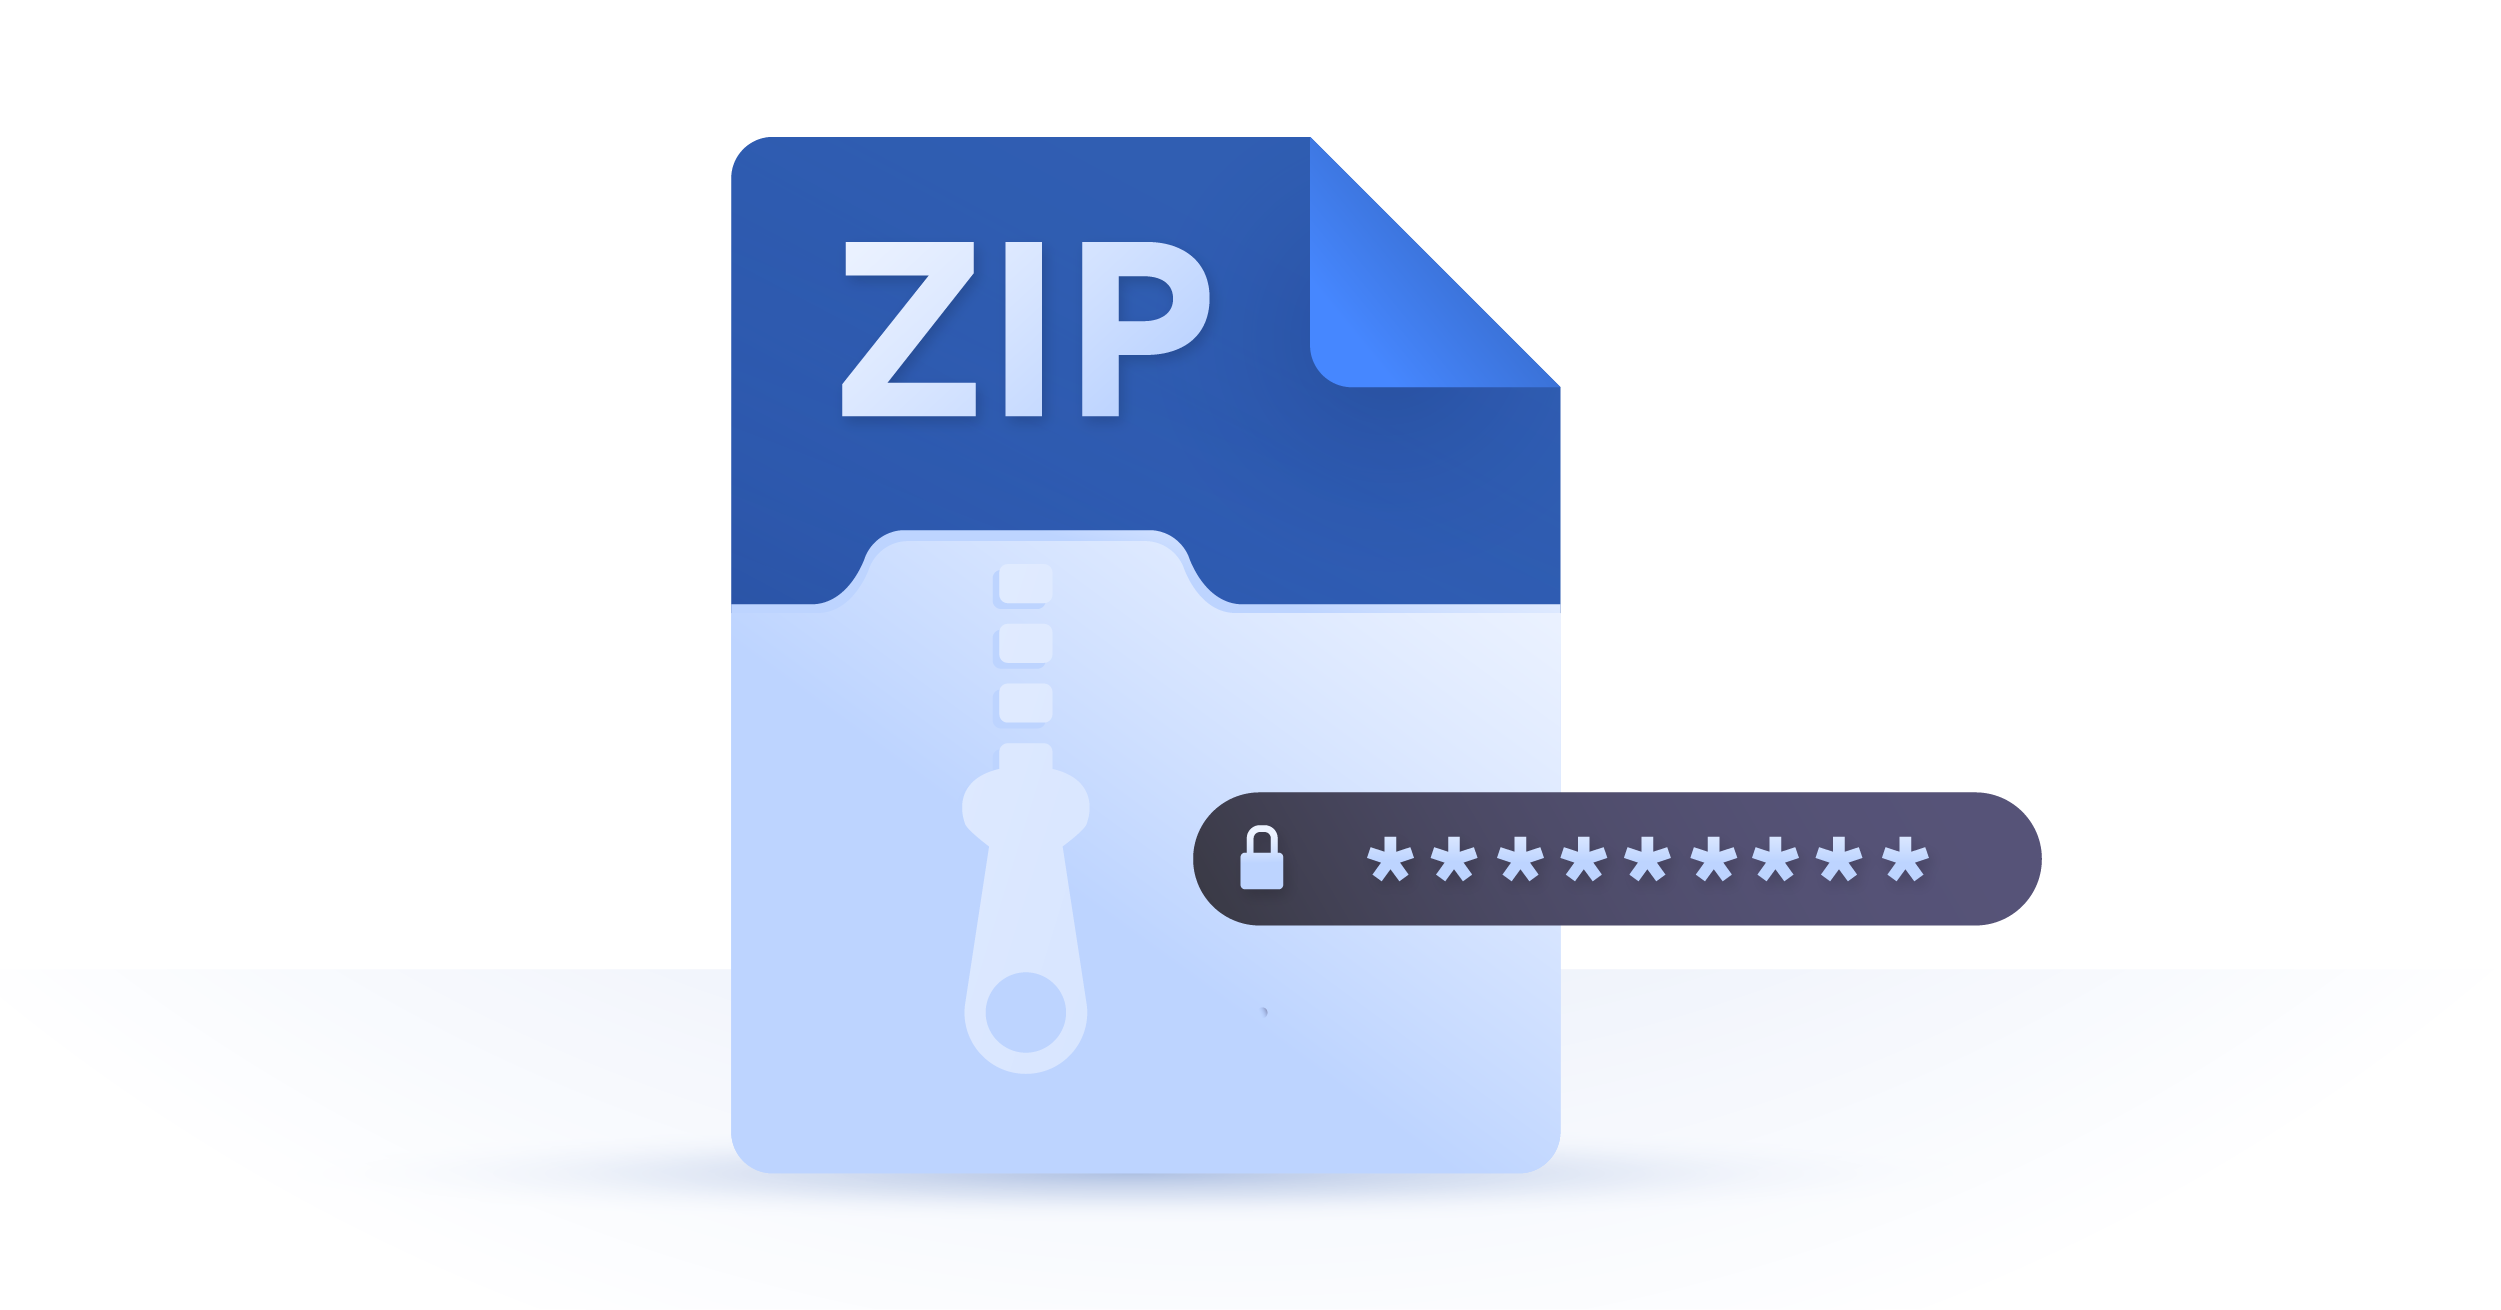 un pack file in winzip with double click